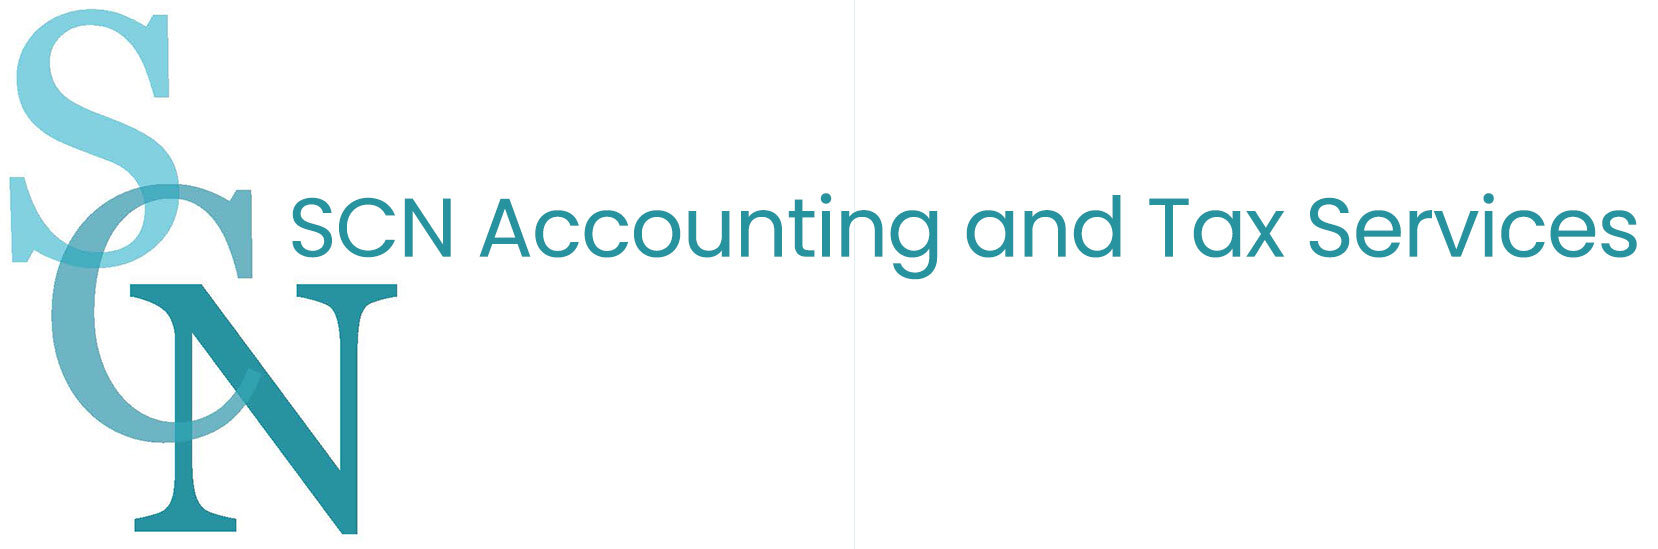 SCN Accounting and Tax Services